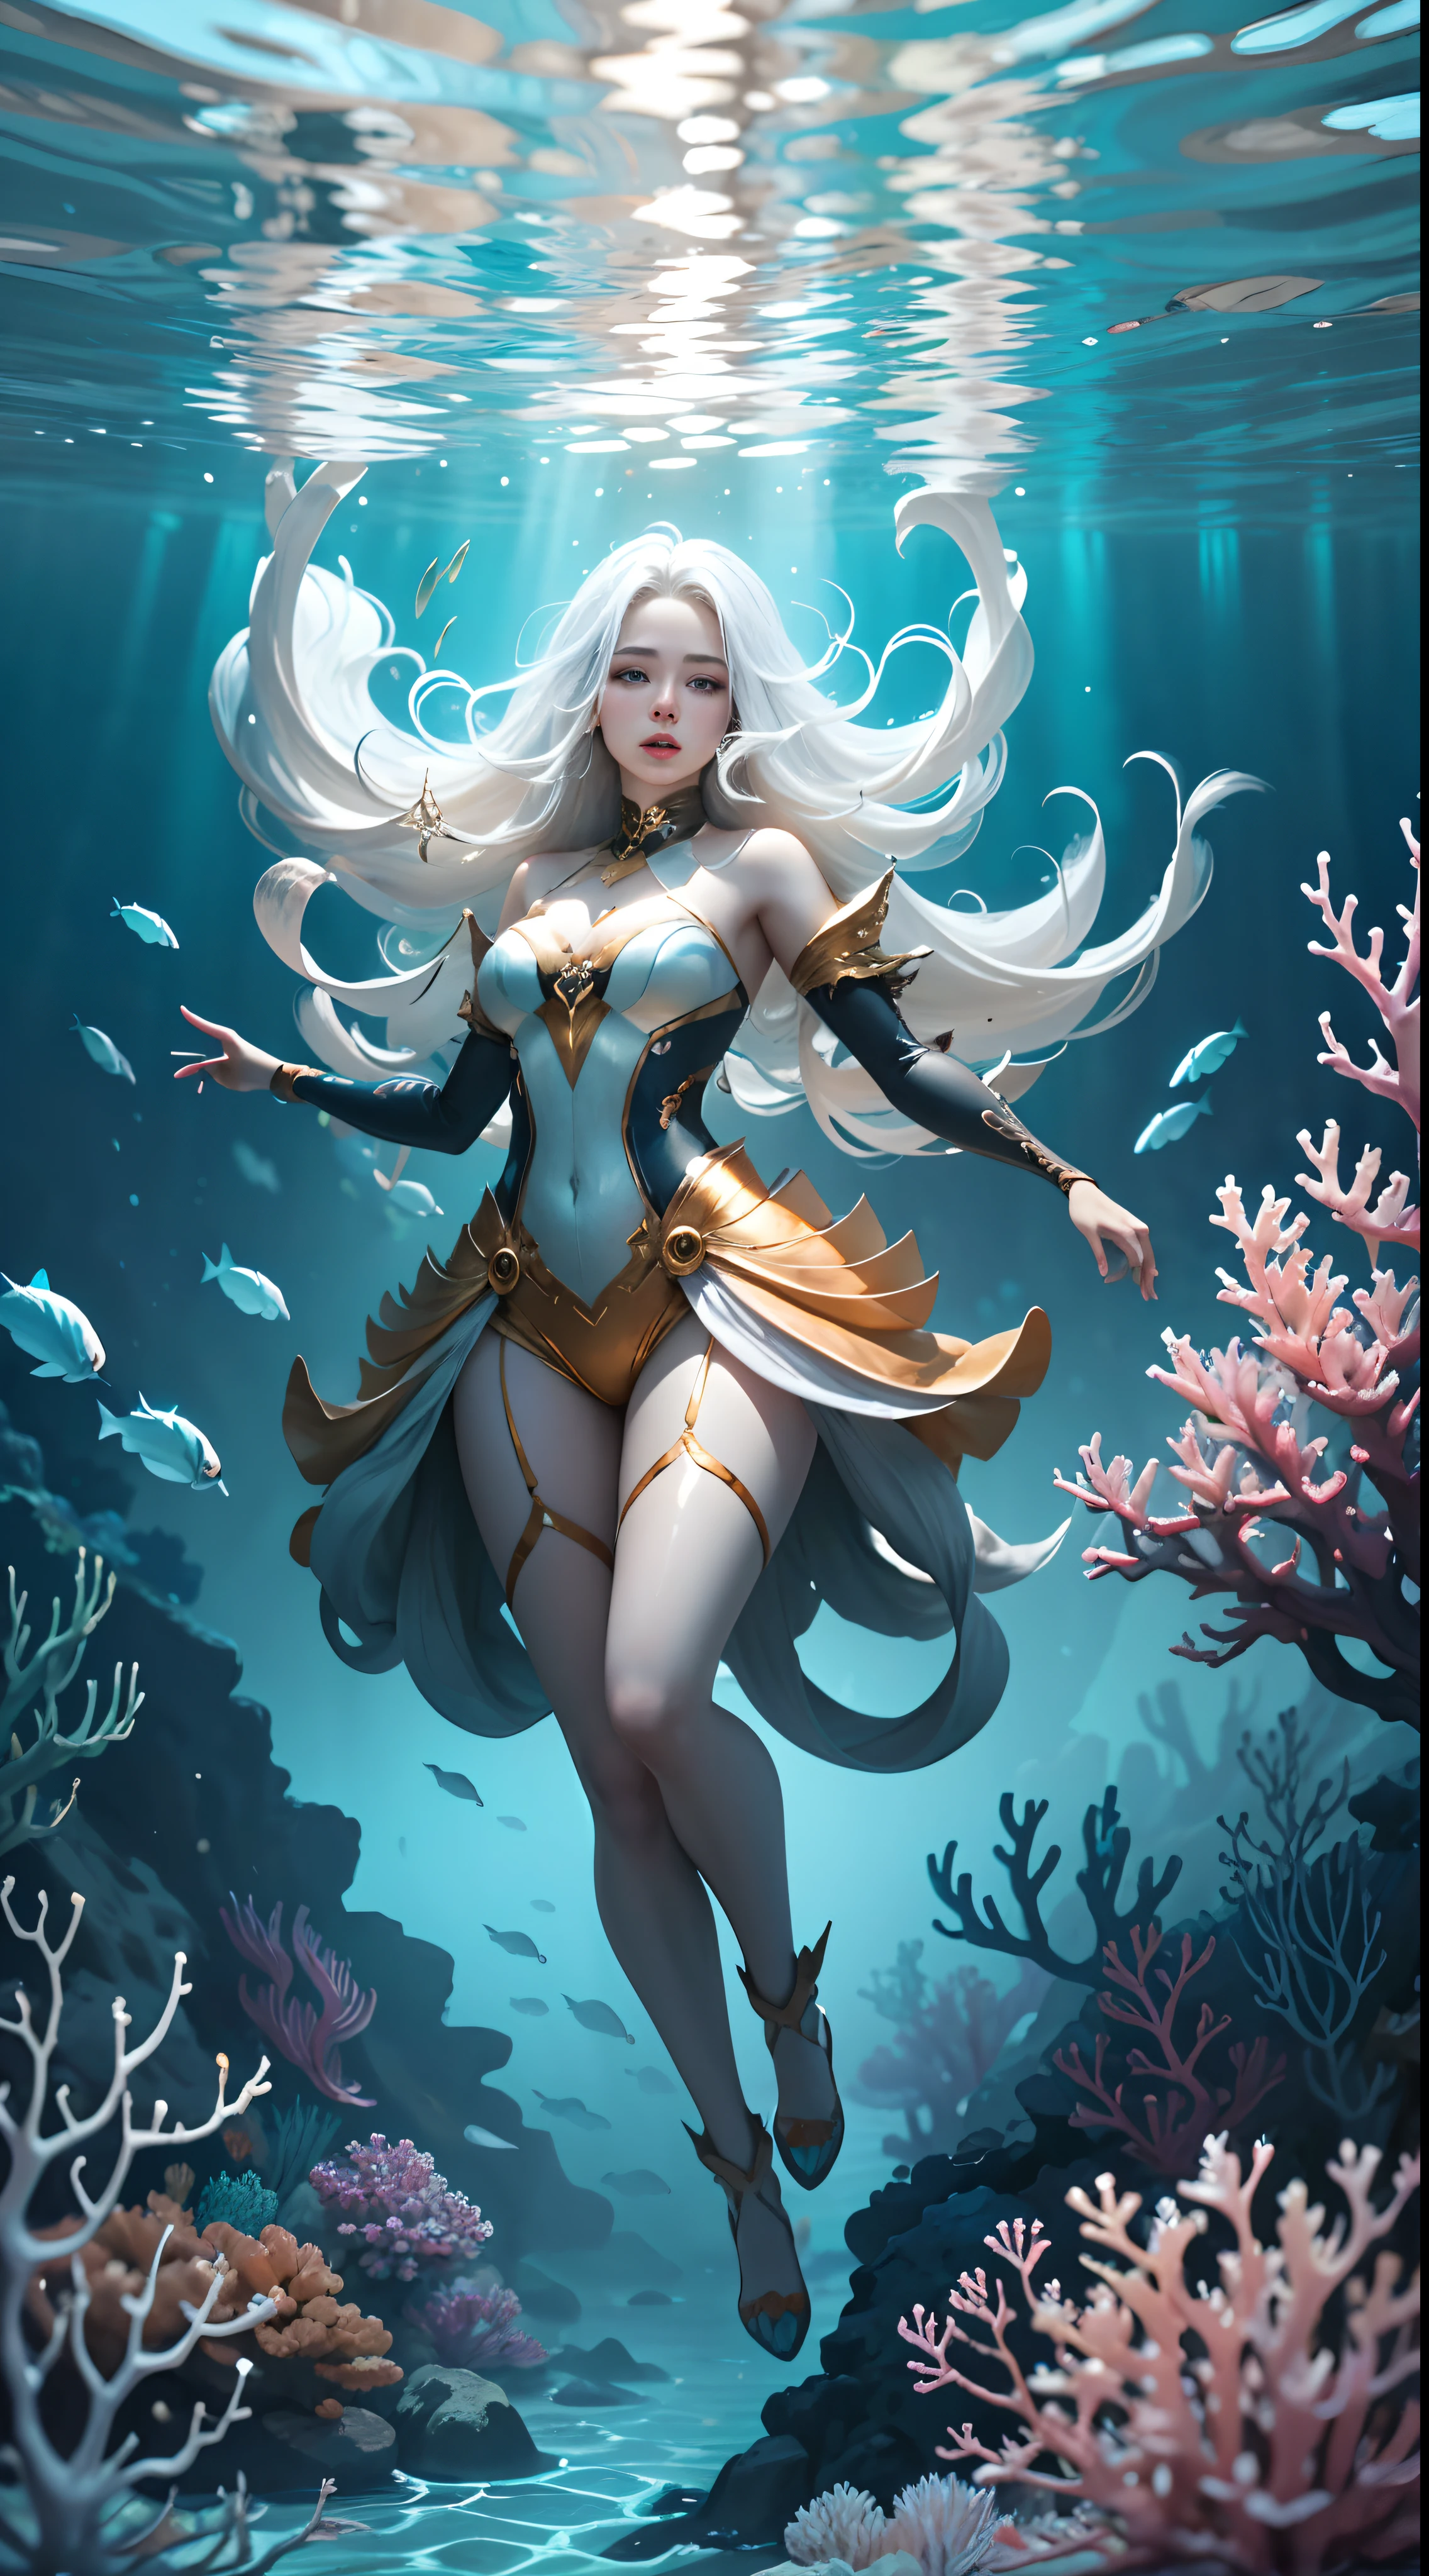 Conceptual art of marine life, Undersea landscape, Marine life，Beautiful coral reefs come in different shapes, 3D，, Fish, Female animated fantasy illustration. Long white hair scattered in the sea, Drift, Very harmonious. The whole painting adopts a messy and imaginative painting style. The colors are bright and saturated, And with smooth lines. The mystery and beauty of the ocean, The painting depicts an underwater world full of life and vitality, Animated art wallpaper 8 K, full body, closeup, Dynamic poses, golden gown